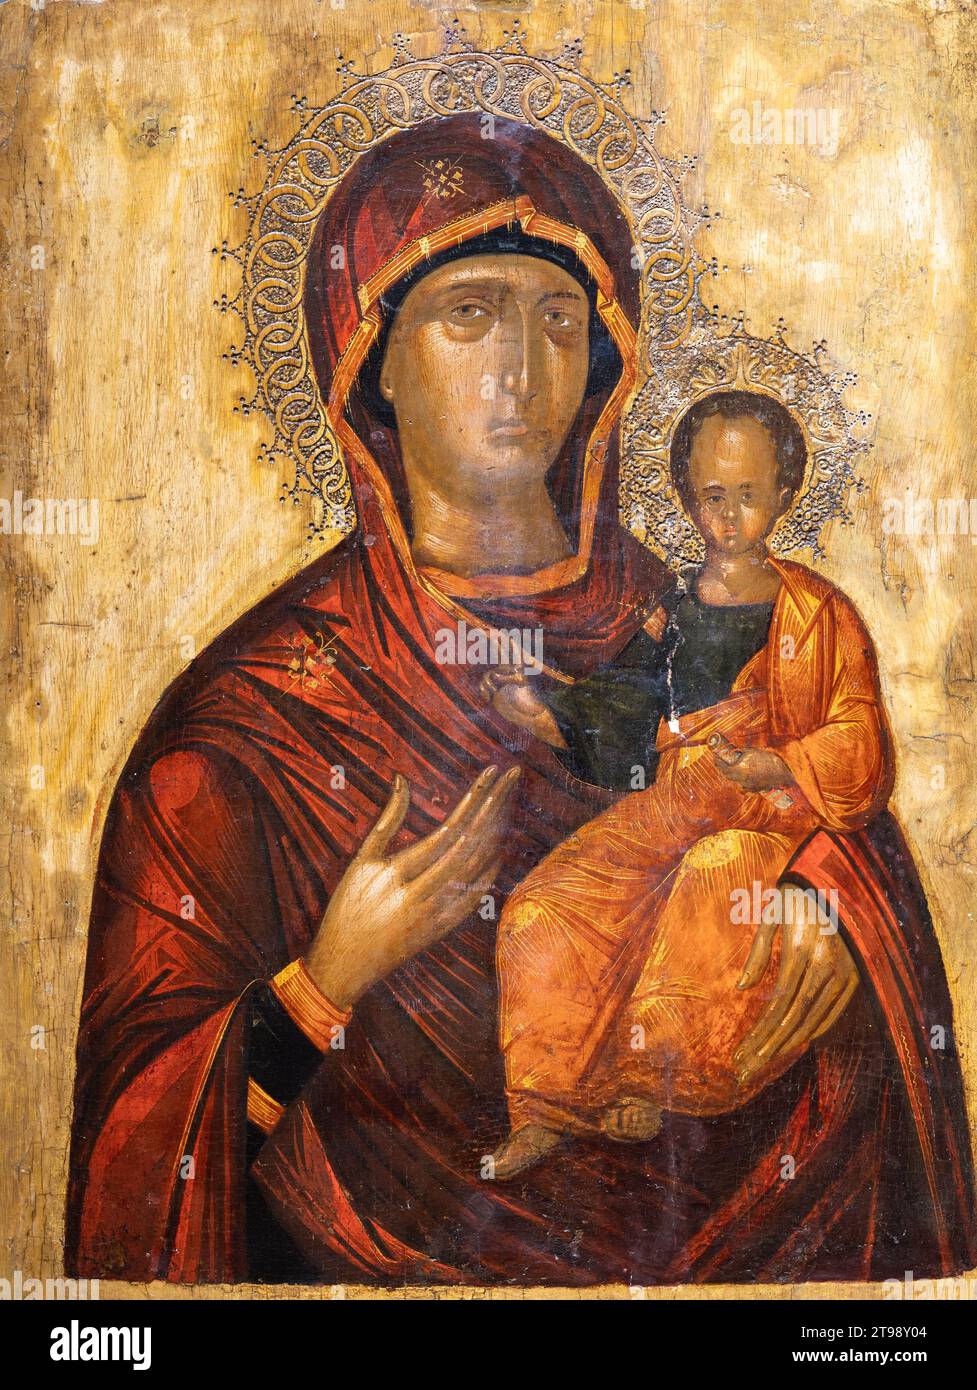 Virgin Hodegetria (Our Lady of the Way). 16th/17th century, by an unknown painter from Crete. The Žitomislić Monastery, Bosnia and Herzegovina. Stock Photo